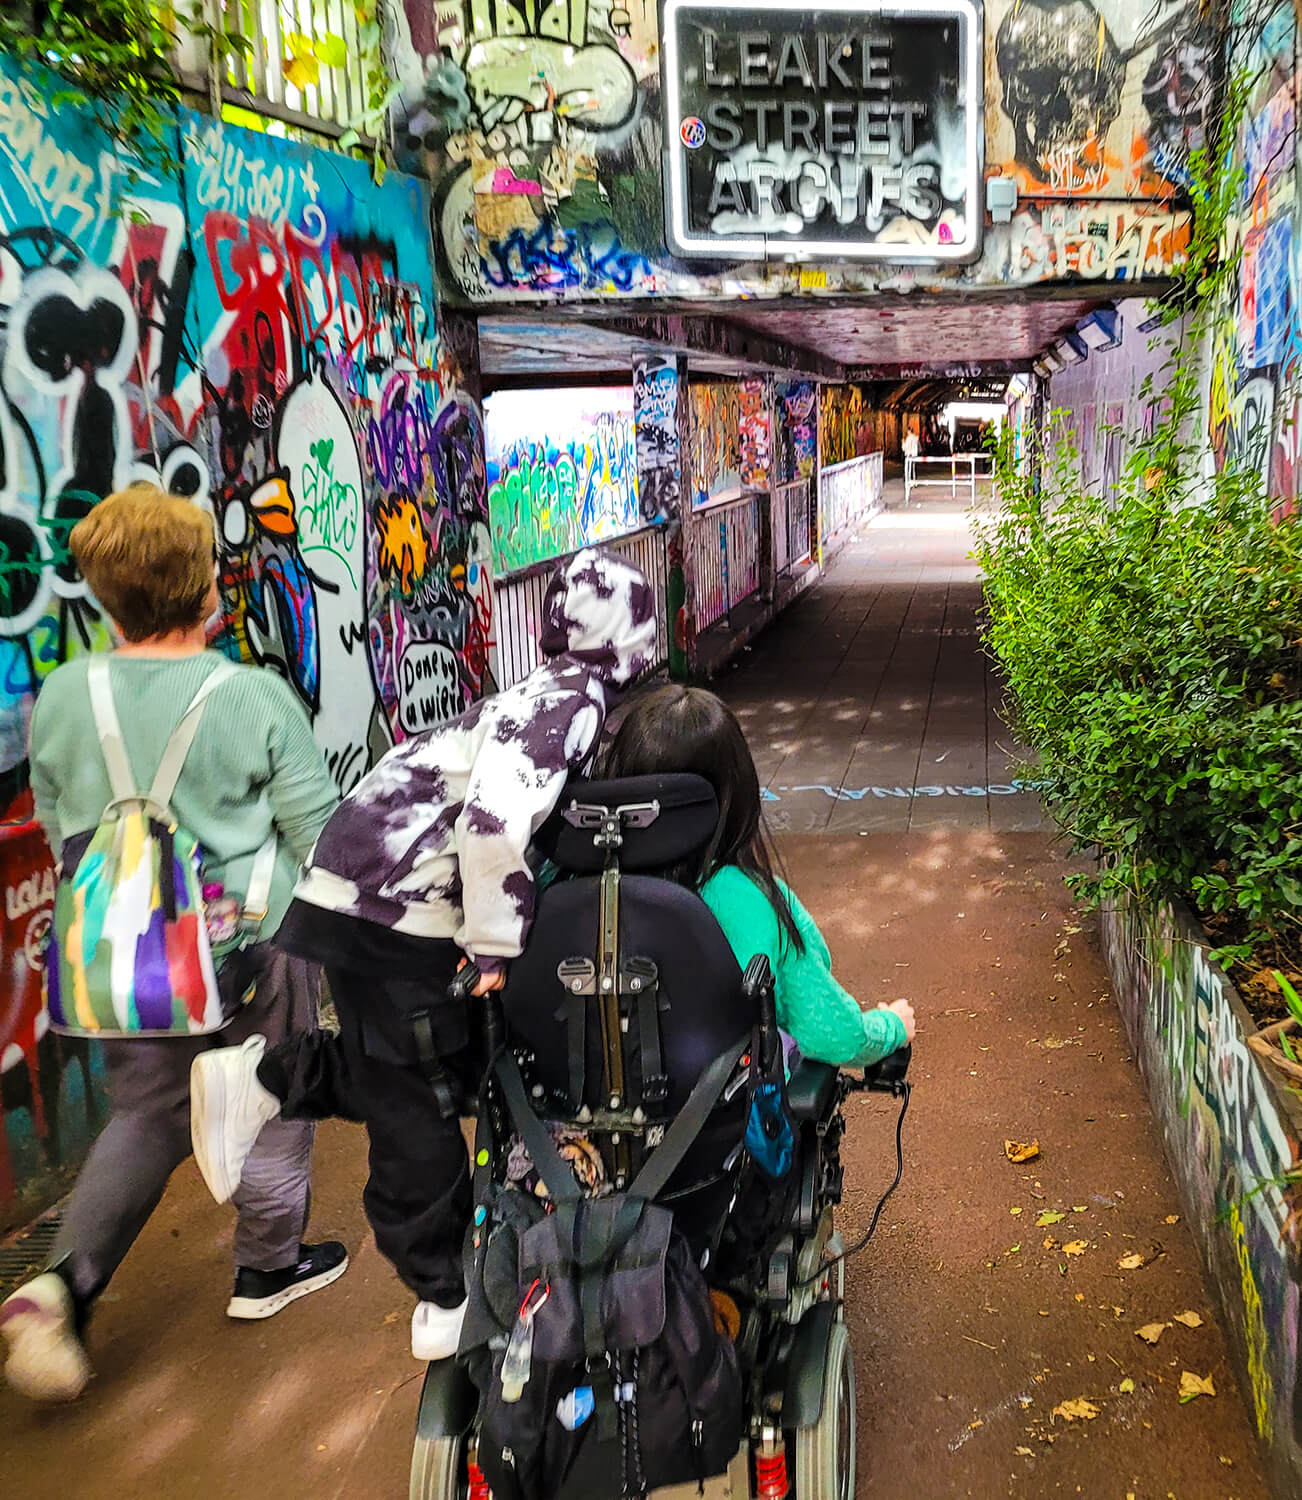 Emma, her mum and nephew entering Leake Street Arches